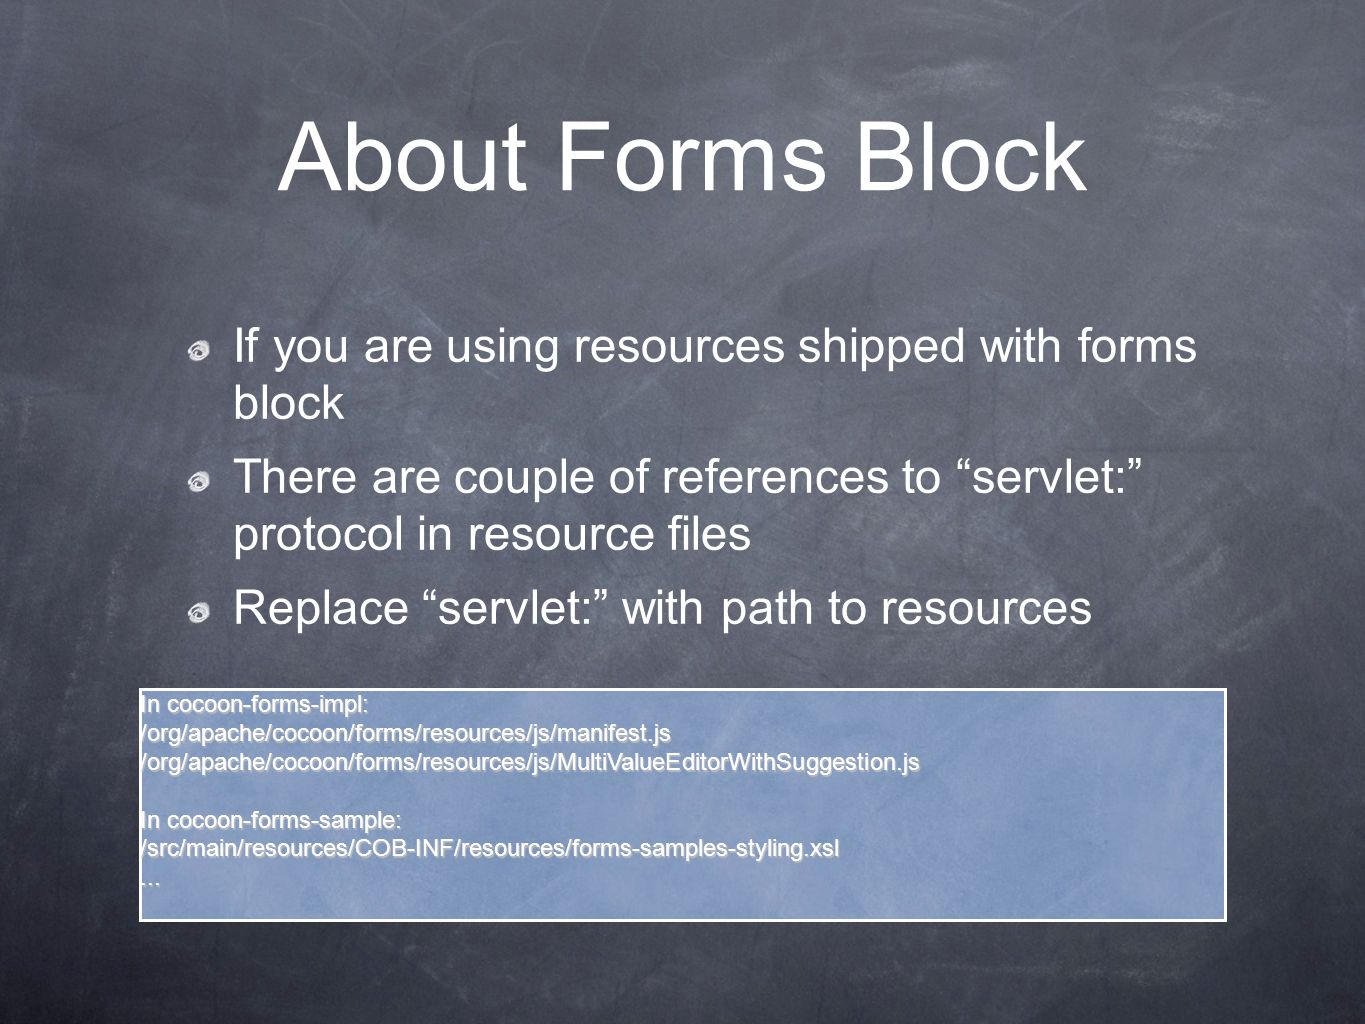 About Forms Block If you are using resources shipped with forms block There are couple of references to servlet: protocol in resource files Replace servlet: with path to resources In cocoon-forms-impl: /org/apache/cocoon/forms/resources/js/manifest.js/org/apache/cocoon/forms/resources/js/MultiValueEditorWithSuggestion.js In cocoon-forms-sample: /src/main/resources/COB-INF/resources/forms-samples-styling.xsl...